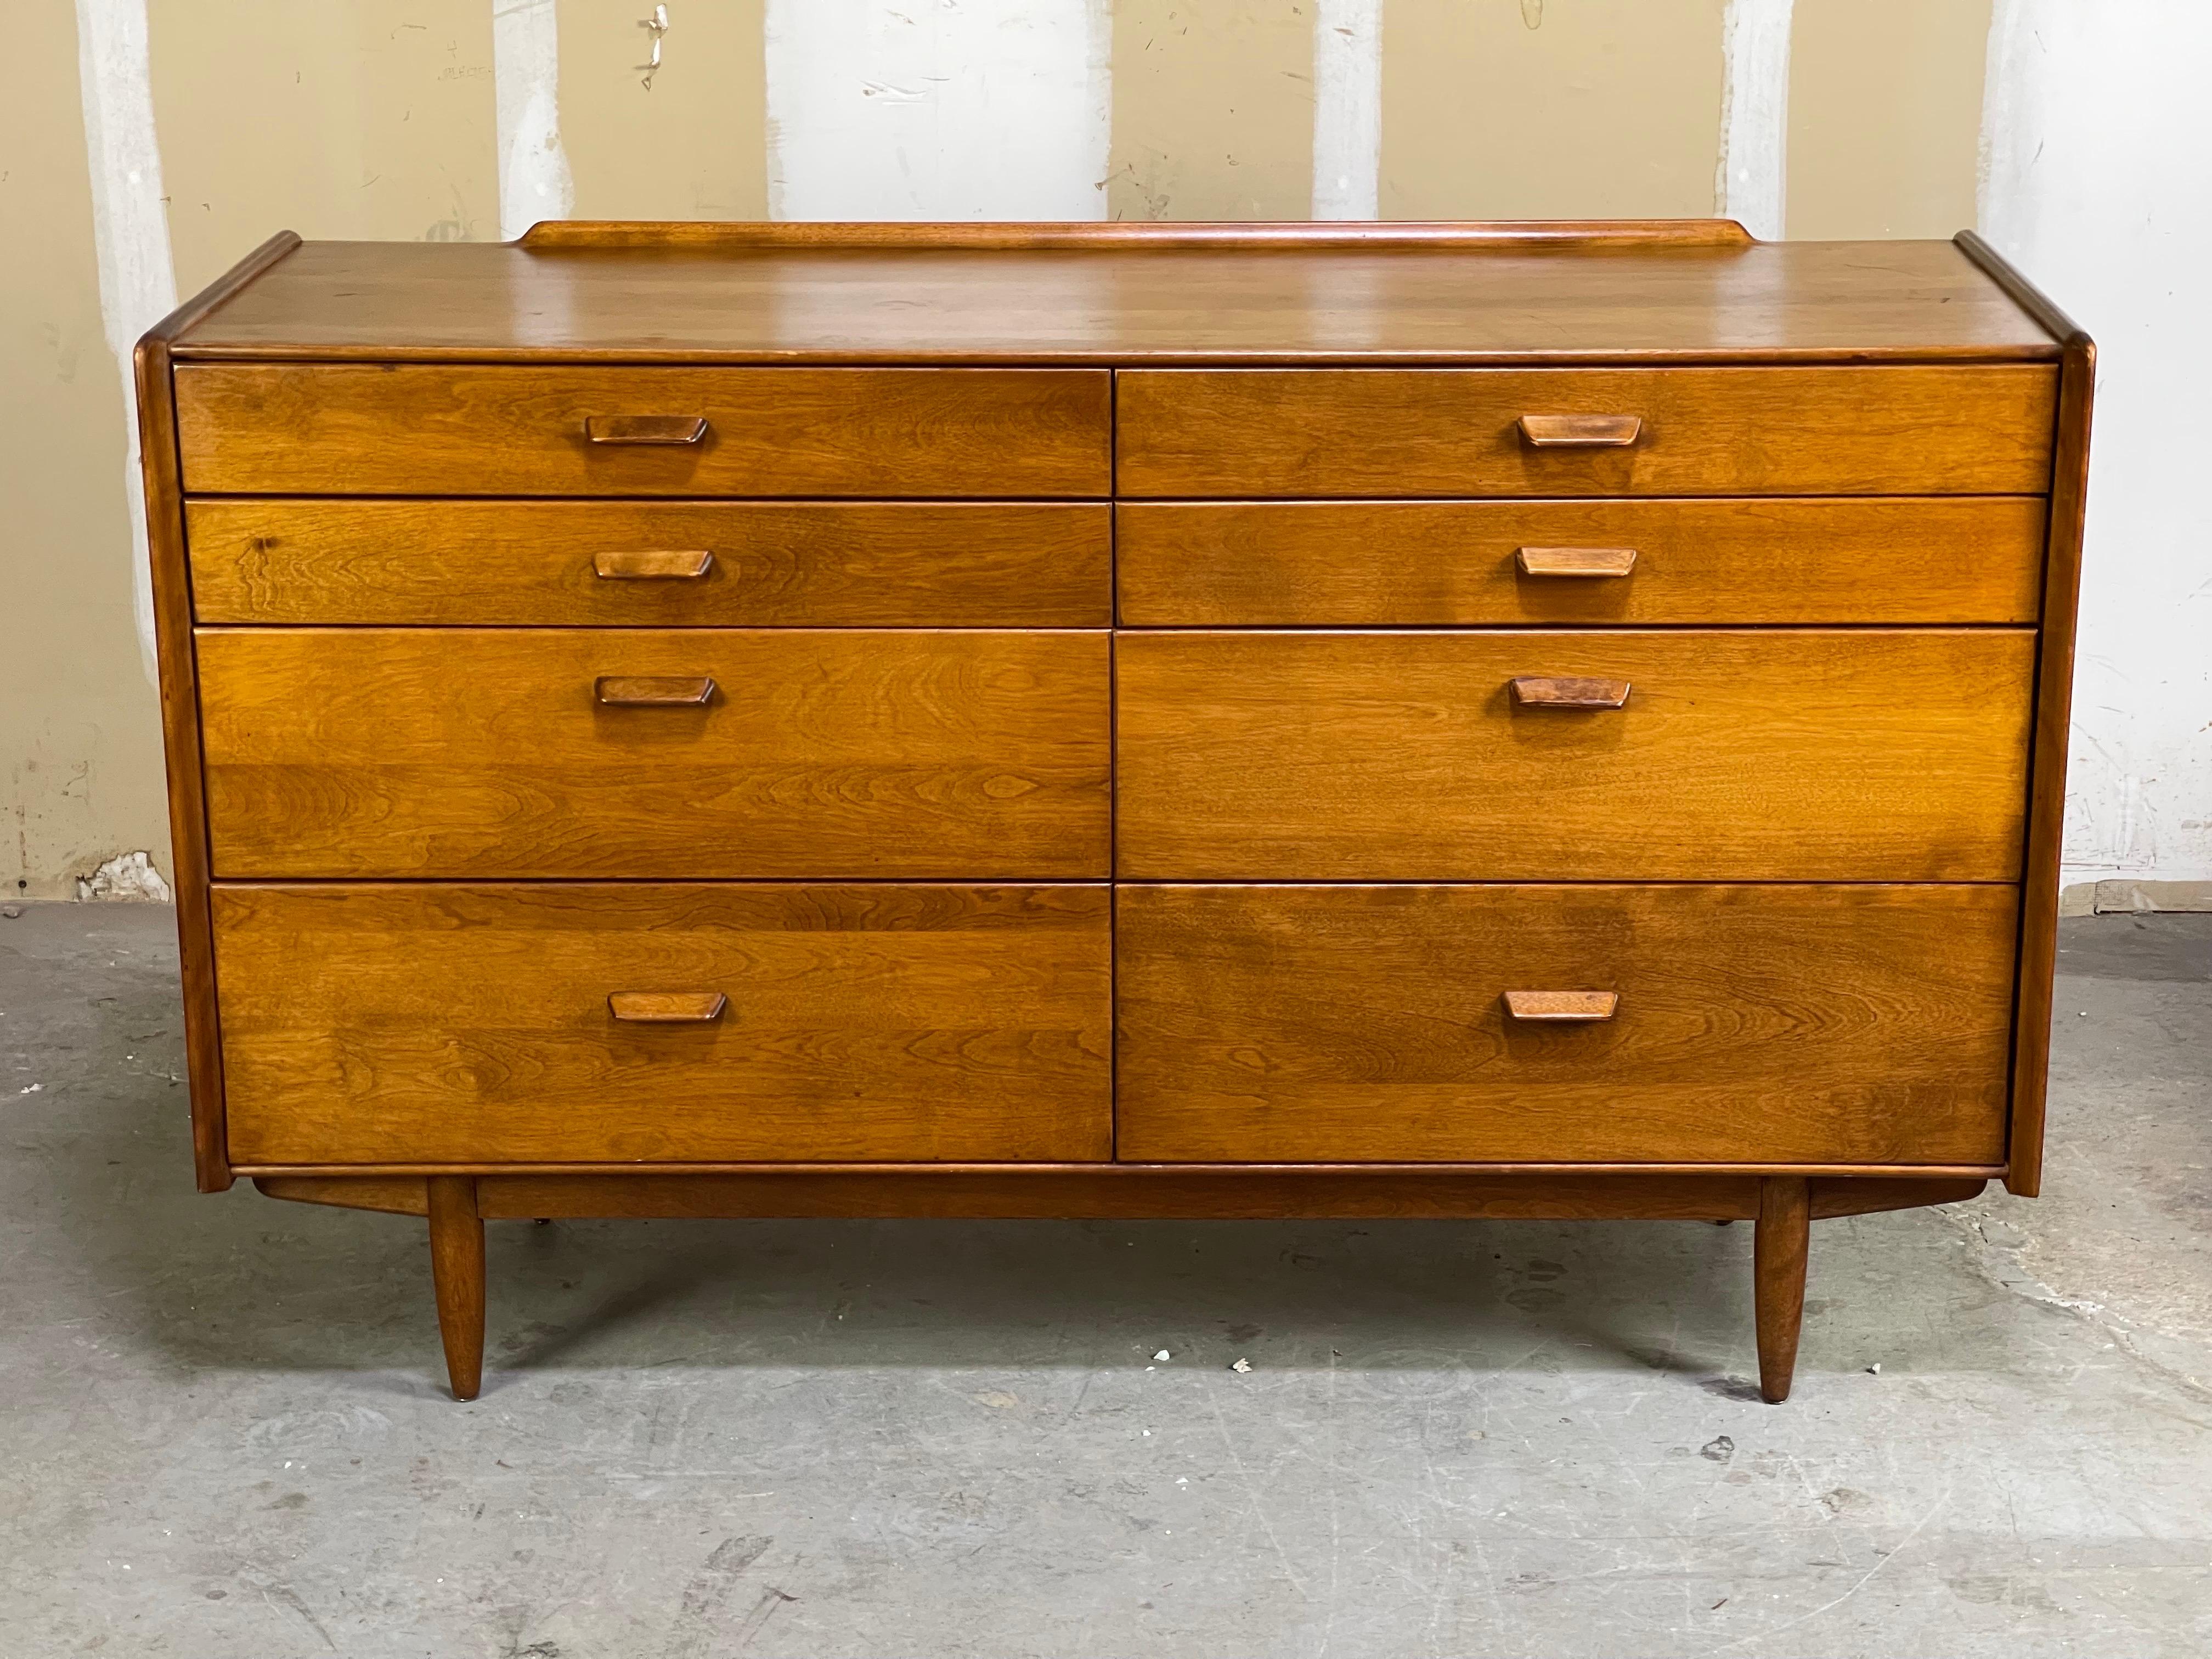 Lovely patina covered Mid-Century Modern dresser in solid staved Maple by Leslie Diamond for Conant Ball. Small cigarette burn and some hard to see scathes on the top for personality. Patina all over the front and pulls. Looks very close to Finn